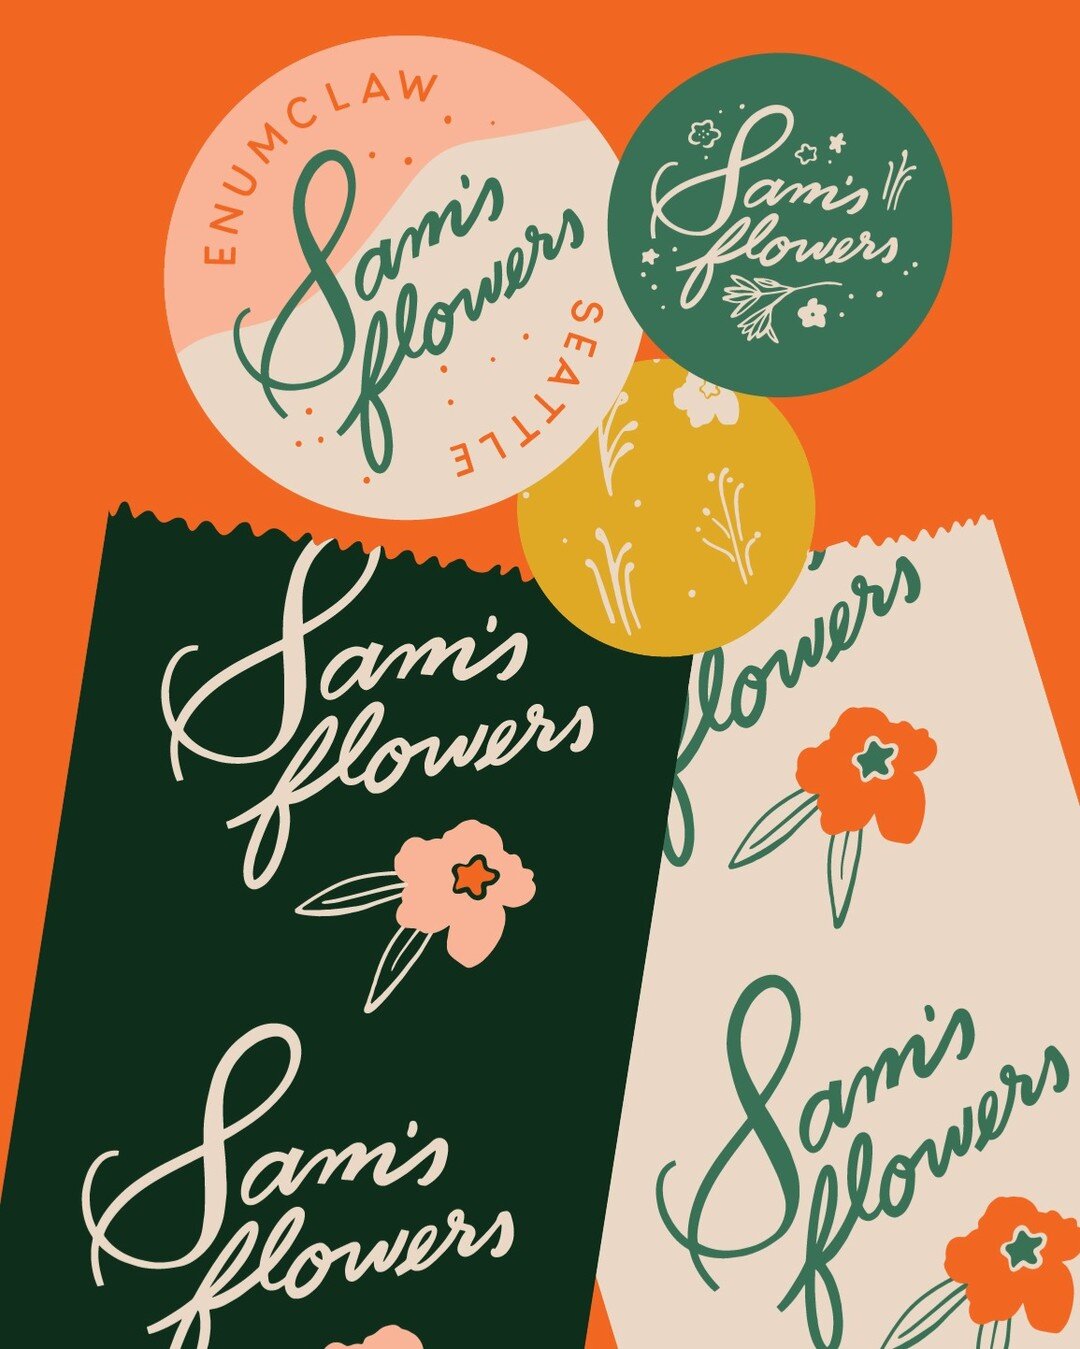 Here is the branding I worked on for Samantha of Sam's Flowers. Based in Enumclaw and Seattle, Sam grows interesting and special flowers for wholesale. We wanted to create something unique and sophisticated, but also kept the charm and magic of a sma